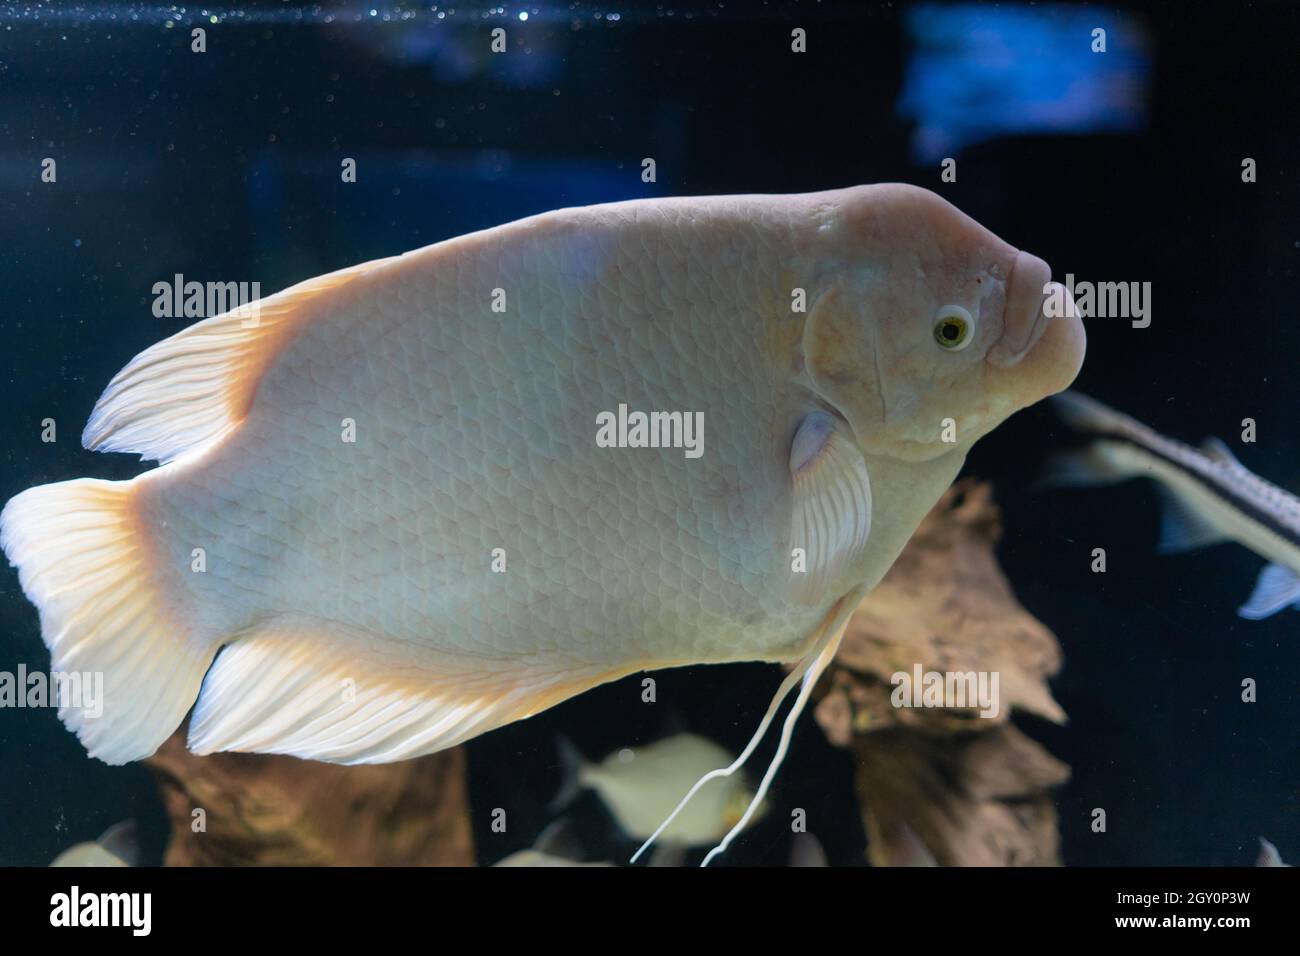 two white fish The real or giant gourami is a freshwater ray-finned fish of the macropod family. swims in a large aquarium. Stock Photo